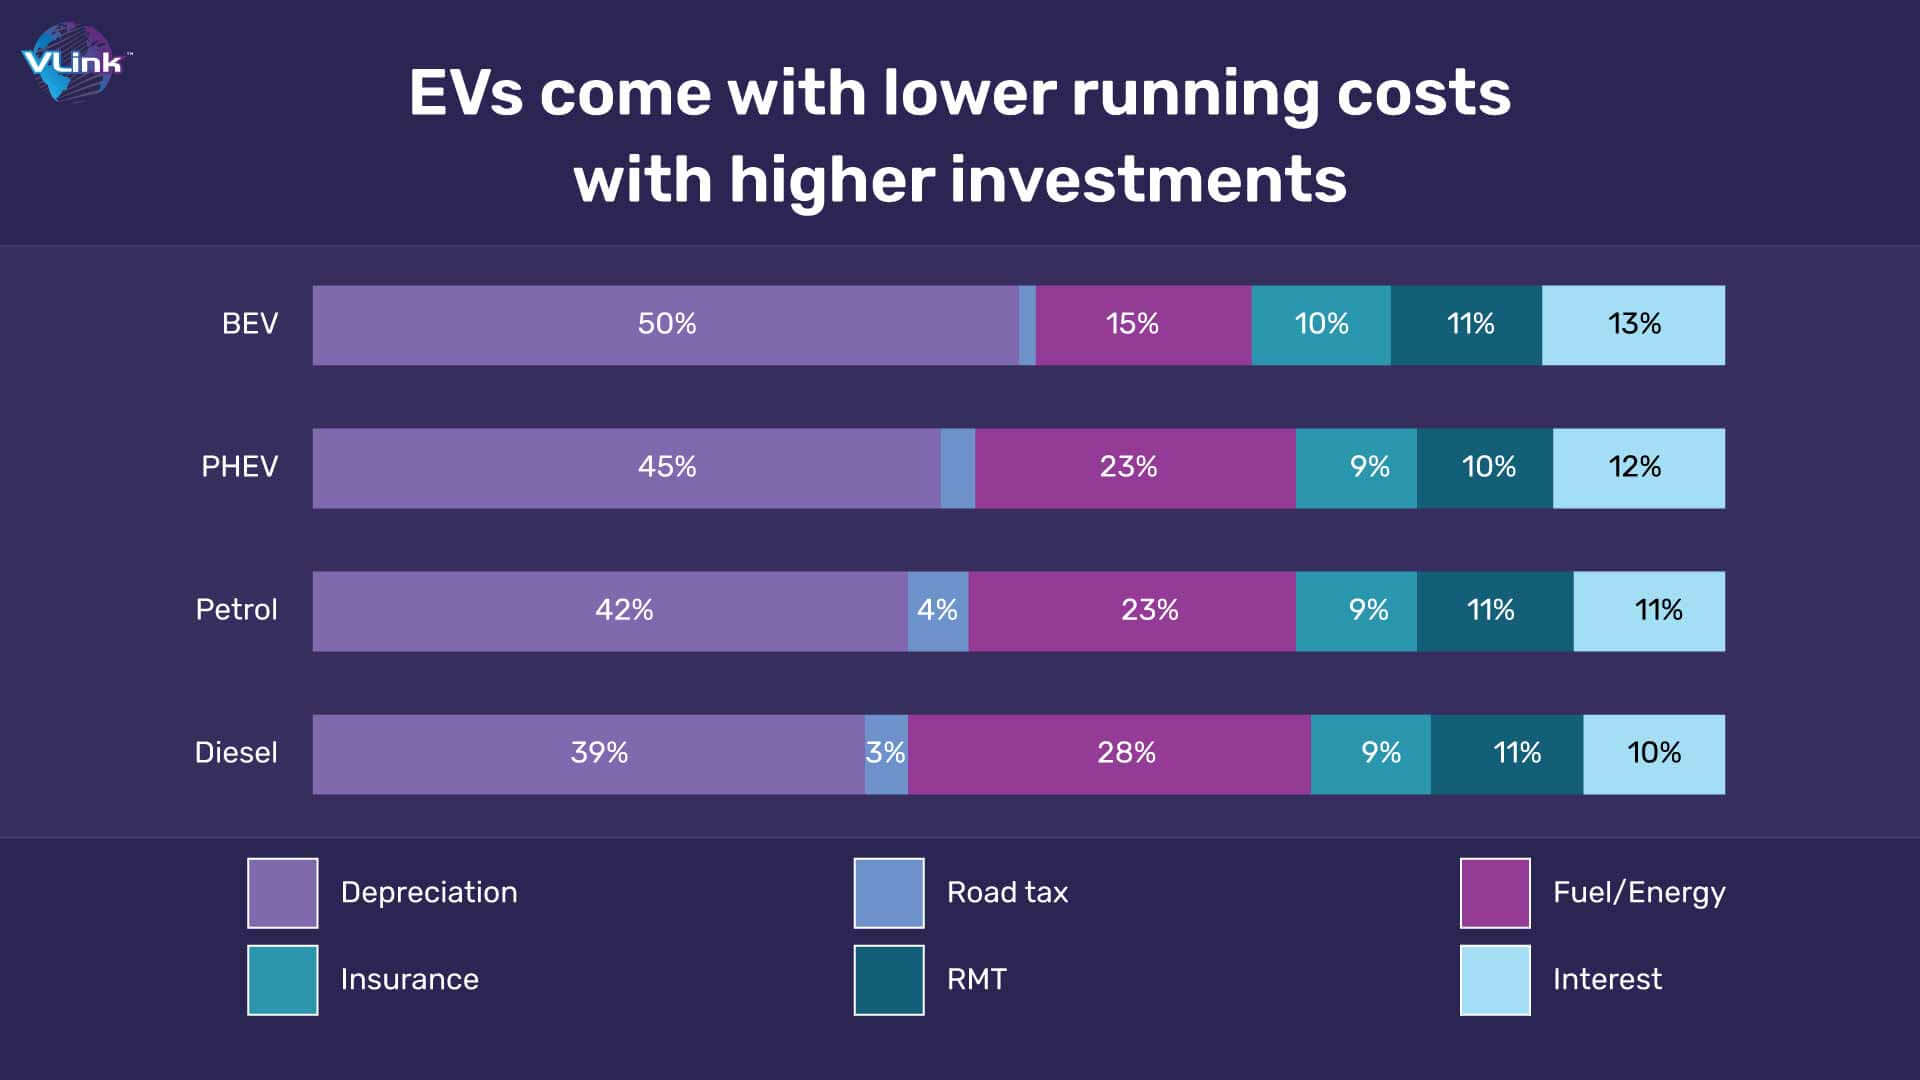 EVs come with lower running costs with higher investments